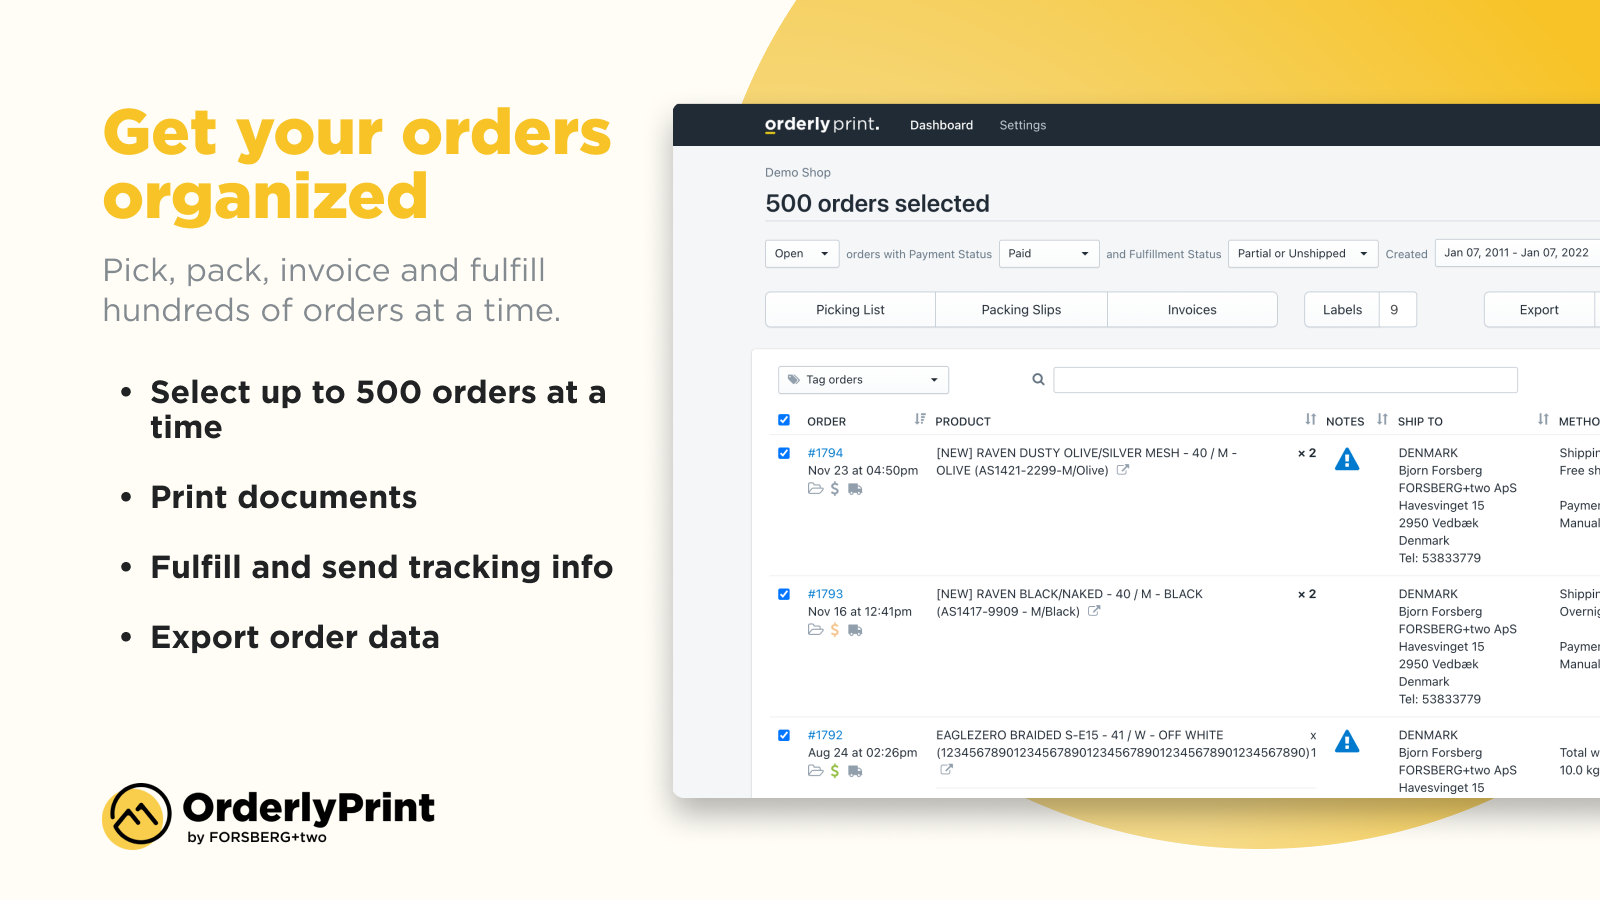 Organized: Pick, pack, invoice & fulfill 100s of orders at once